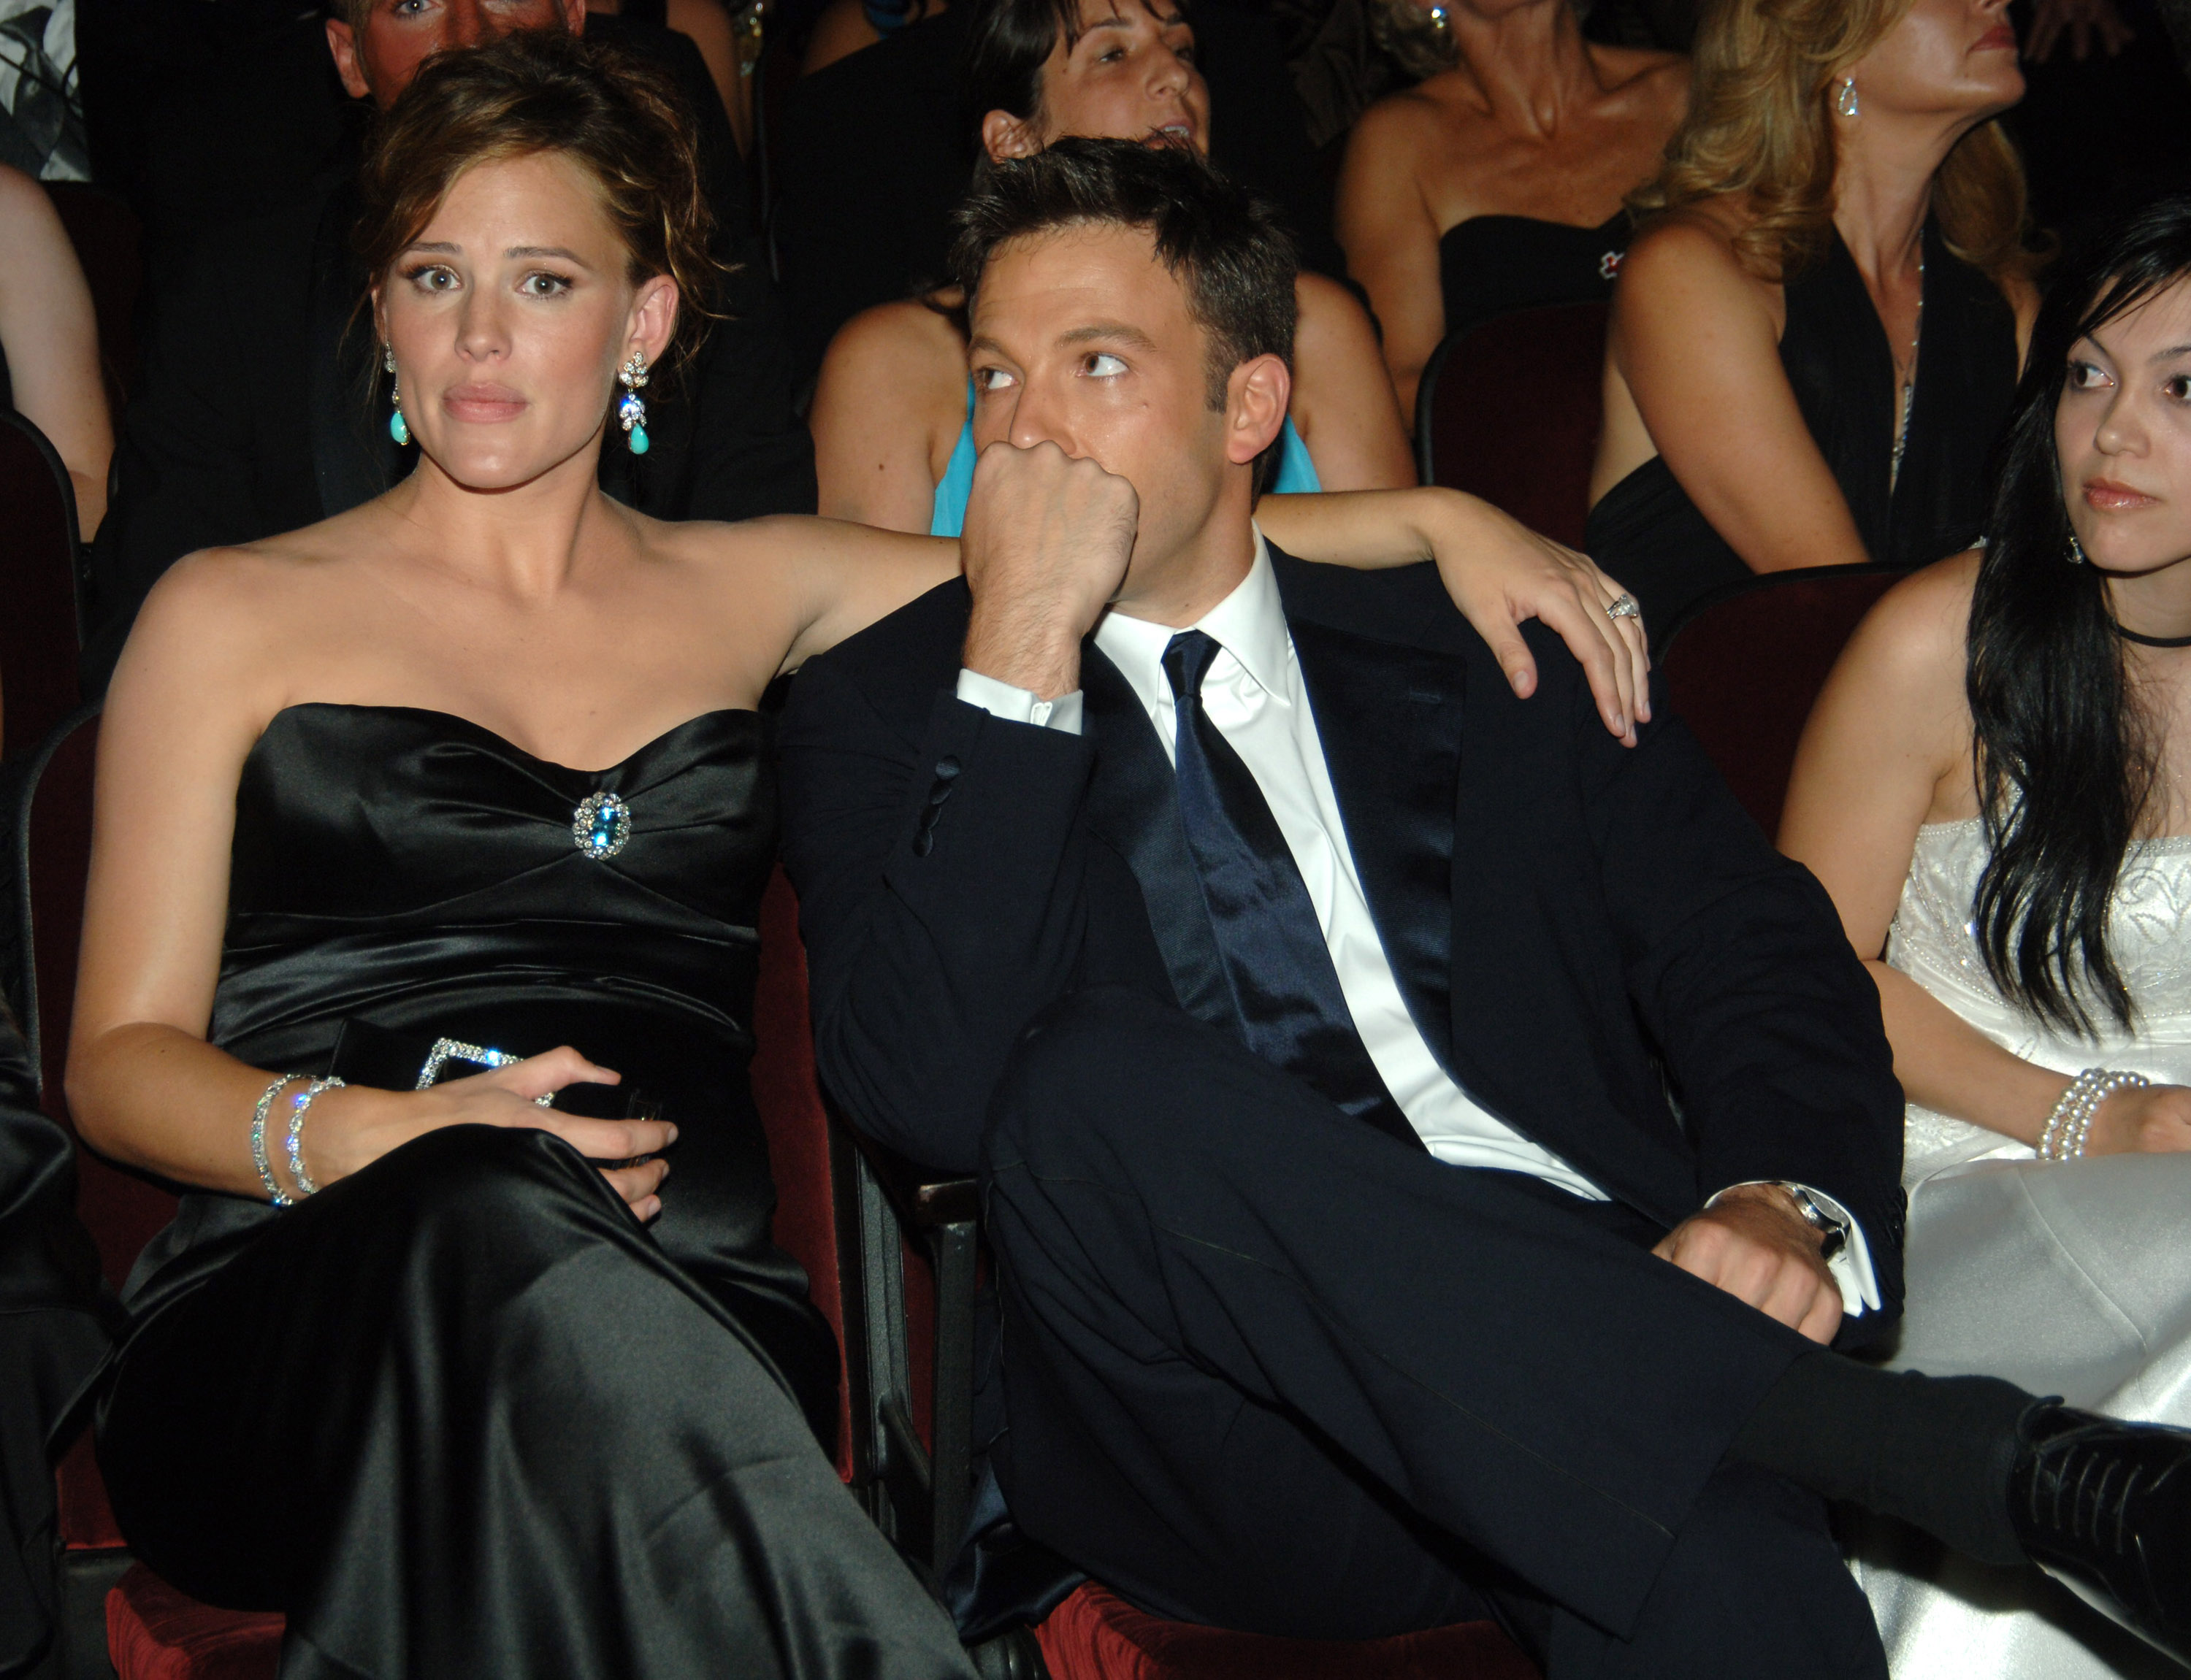 Jennifer Garner and Ben Affleck at the 57th Annual Primetime Emmy Awards in Los Angeles, 2005 | Source: Getty Images